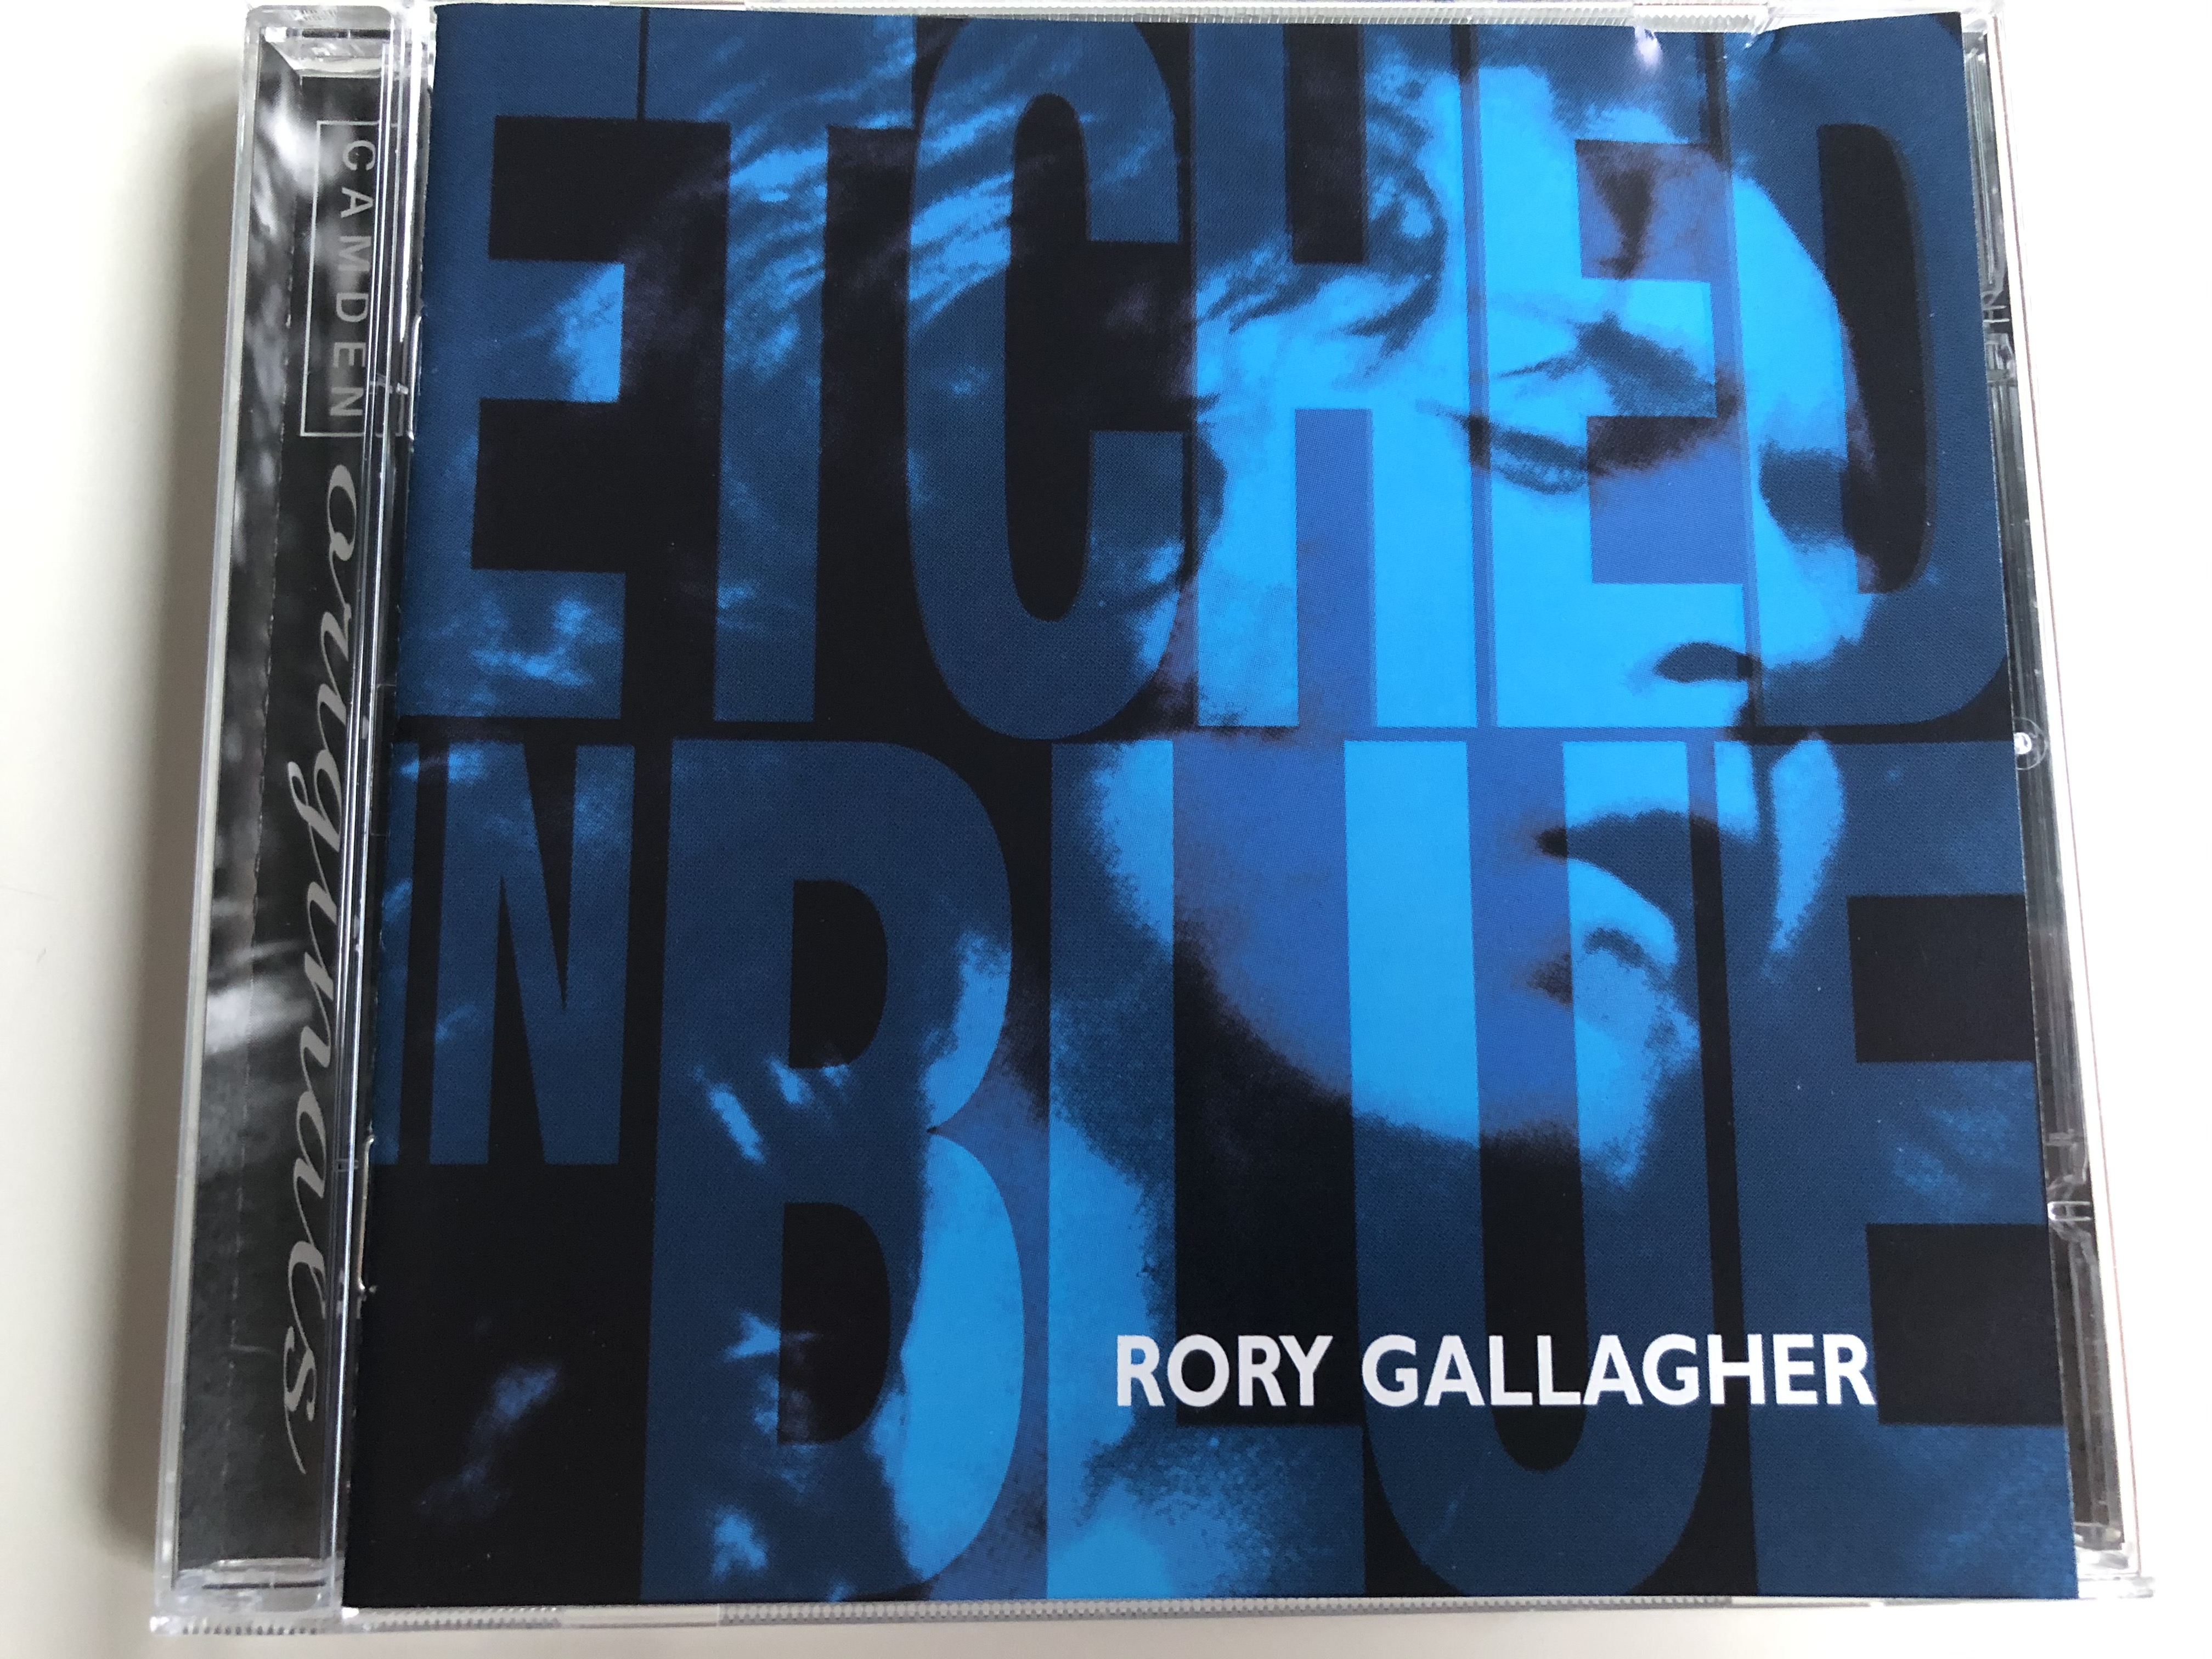 etched-in-blue-rory-gallagher-bmg-audio-cd-1997-74321-627972-2-.jpg